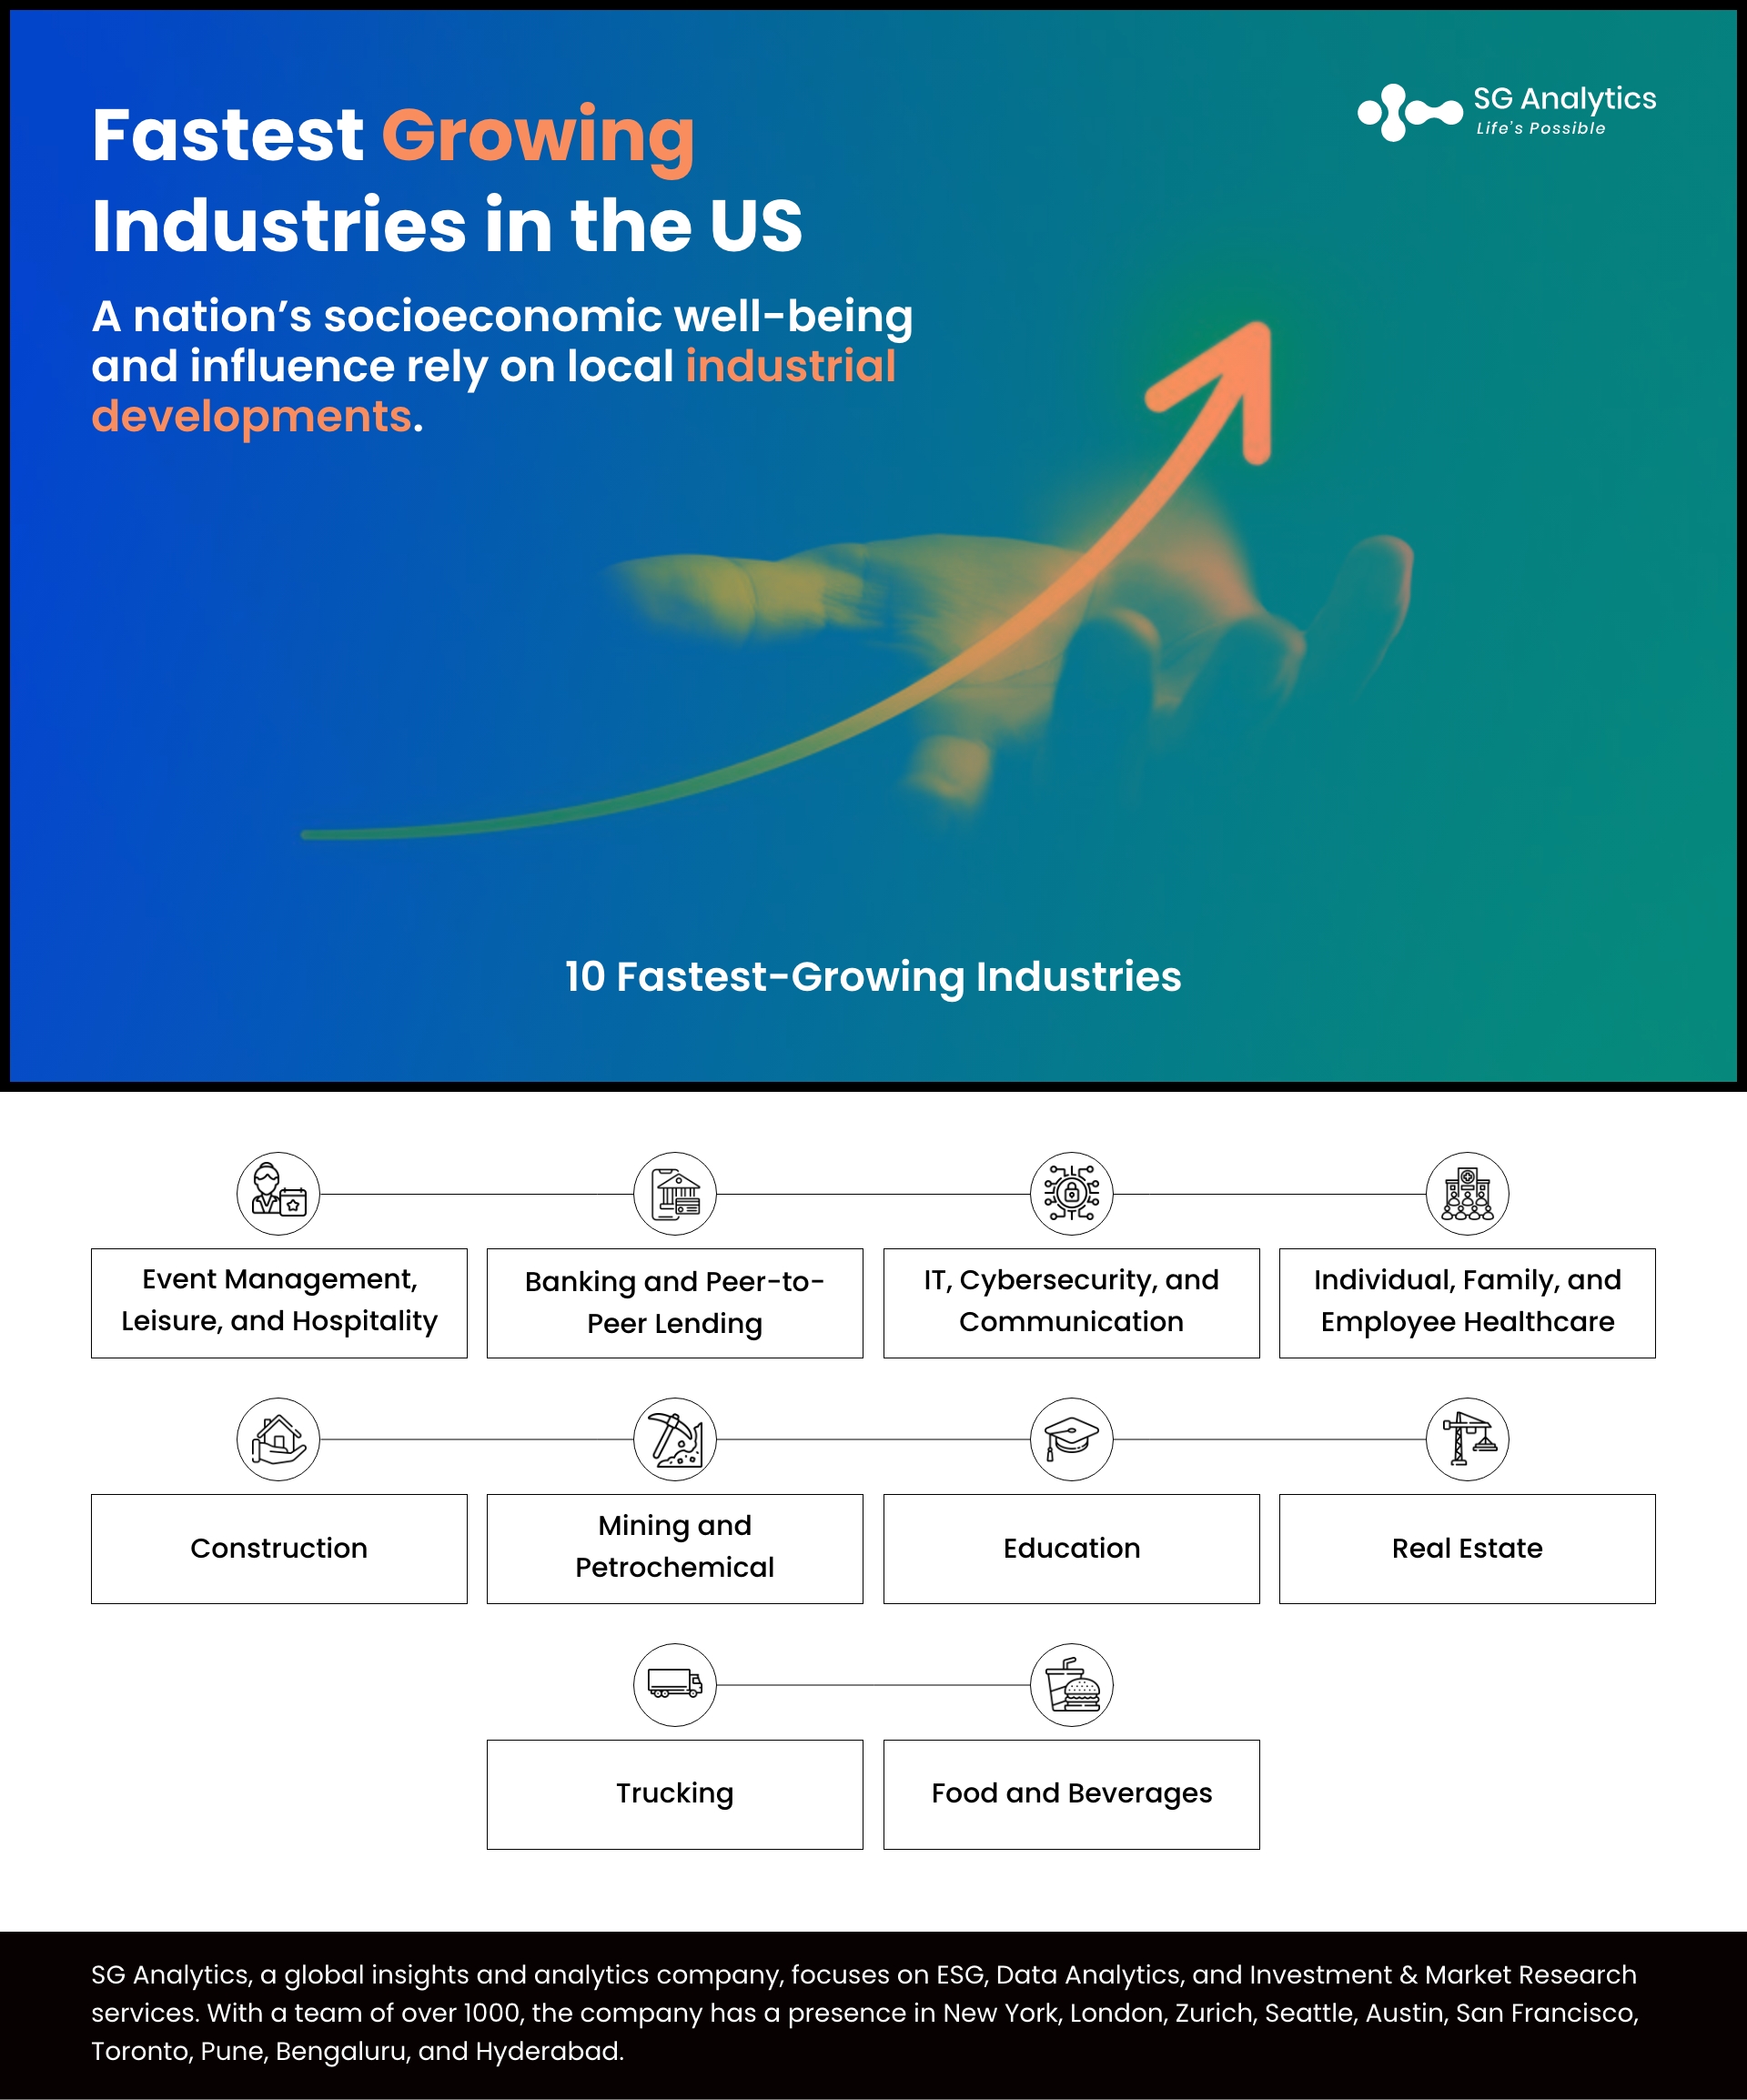 Fastest Growing Industries in the US